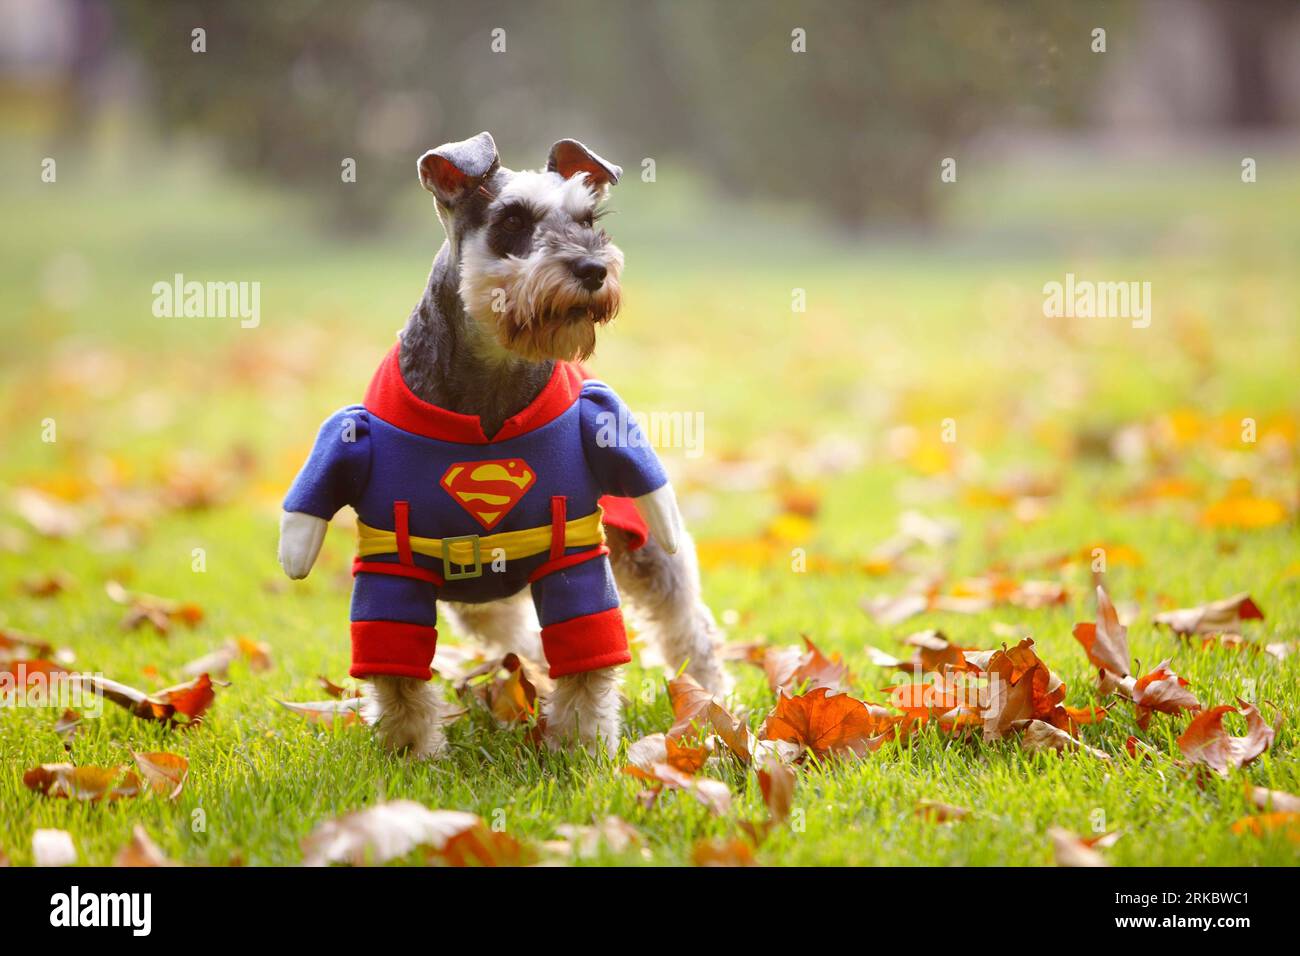 Bildnummer: 54616358  Datum: 06.11.2010  Copyright: imago/Xinhua (101106) -- BEIJING, Nov. 6, 2010 (Xinhua) -- A pet dog dressed in the costume of Superman is seen in a street park in Beijing, capital of China, Nov. 6, 2010. Keeping pets has become a fashion for some senior citizens in China. Some senior citizens belive that raising pets will keep them energetic and heathy both physically and mentally. (Xinhua/Zheng Huansong) (lb) CHINA-BEIJING-LIFESTYLE-SENIOR CITIZEN-PETS (CN) PUBLICATIONxNOTxINxCHN Gesellschaft kbdig xkg 2010 quer Aufmacher kurios o0 Hundemode Hunde Tiere Kleidung    Bildnu Stock Photo